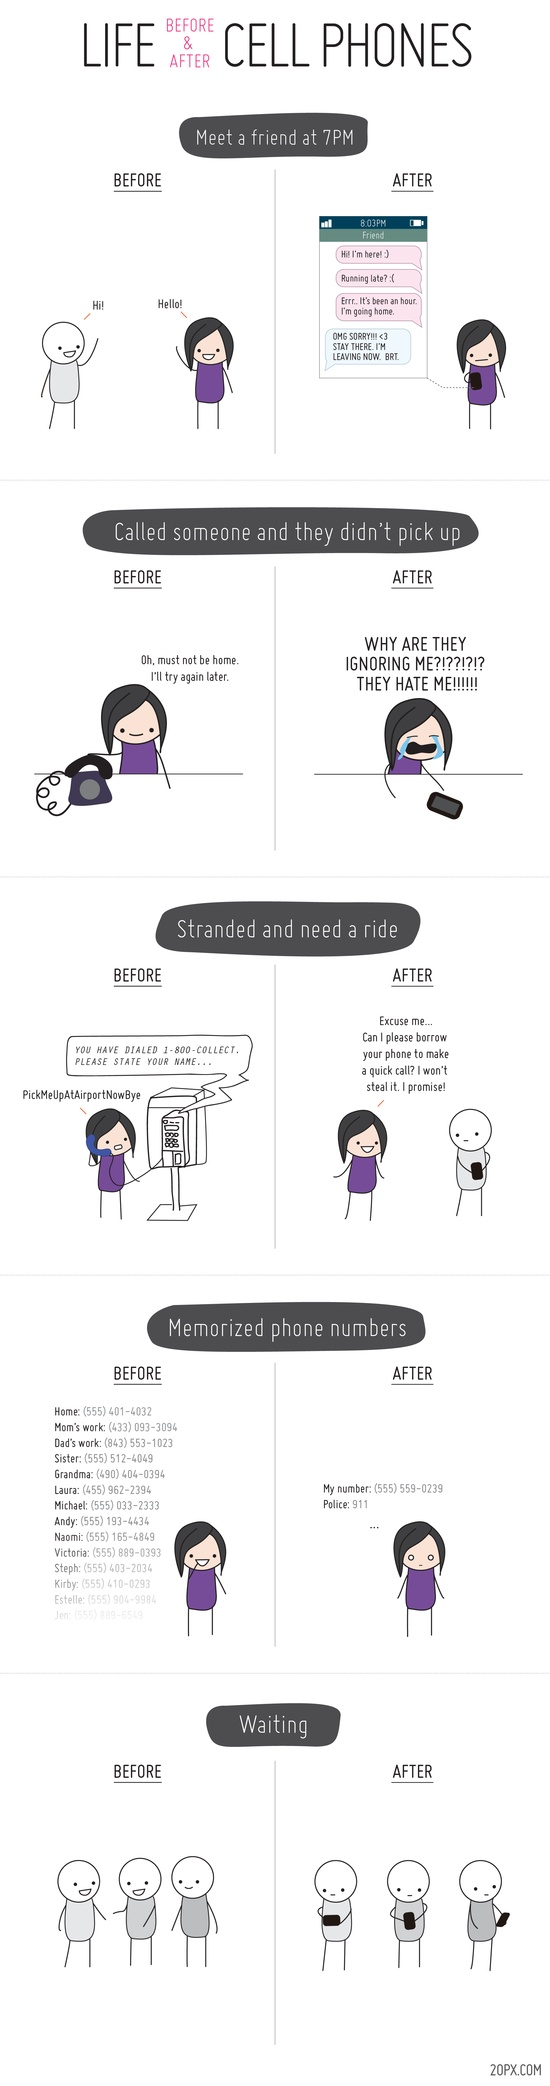 Life before and after smartphones